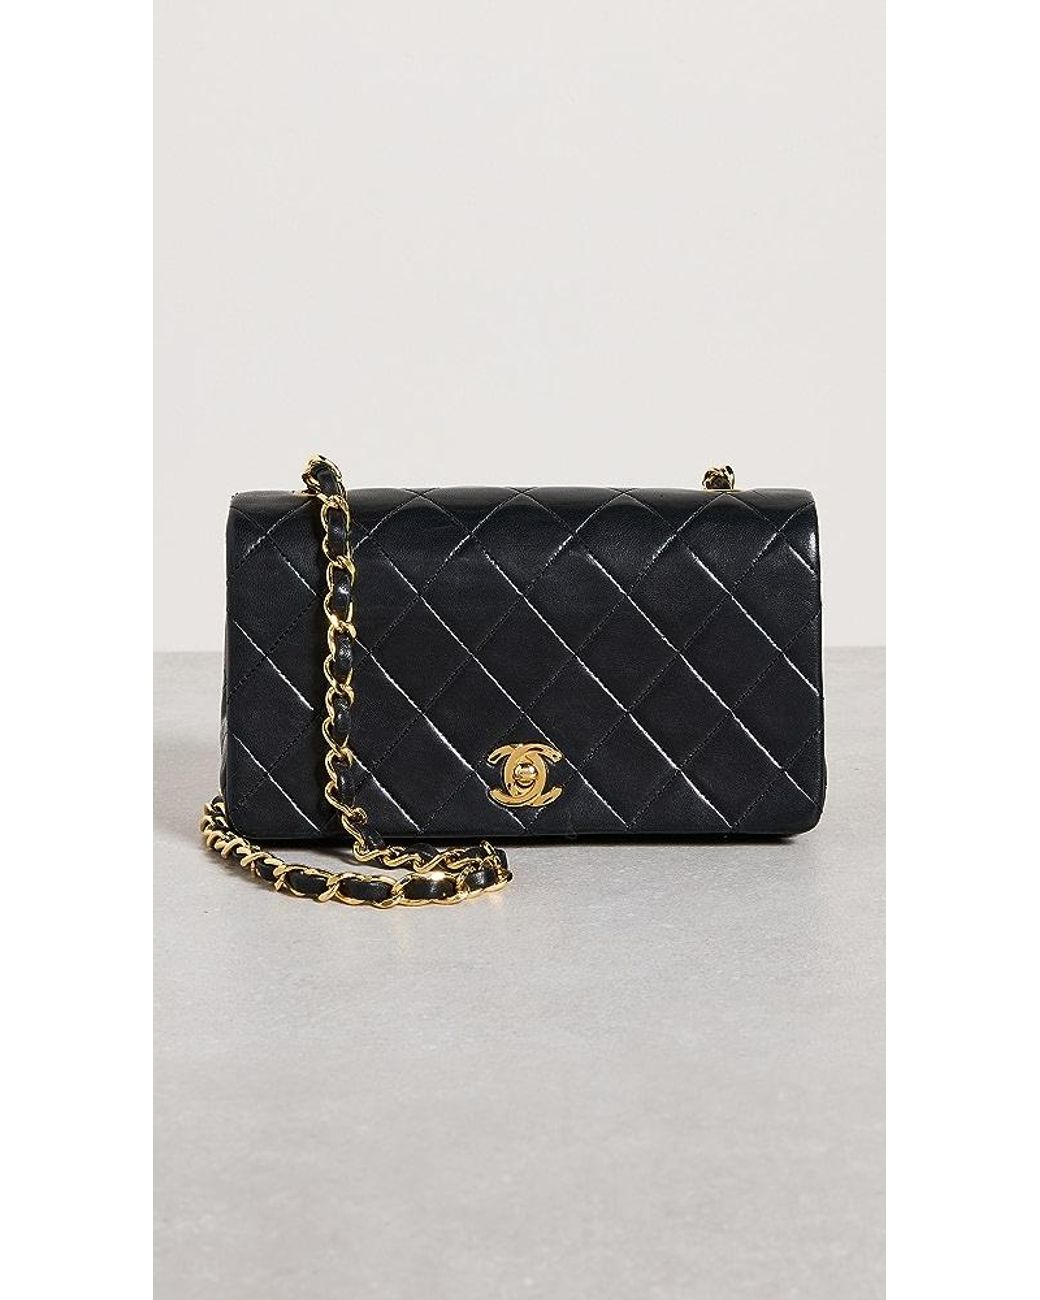 What Goes Around Comes Around Chanel Black Flap Bag